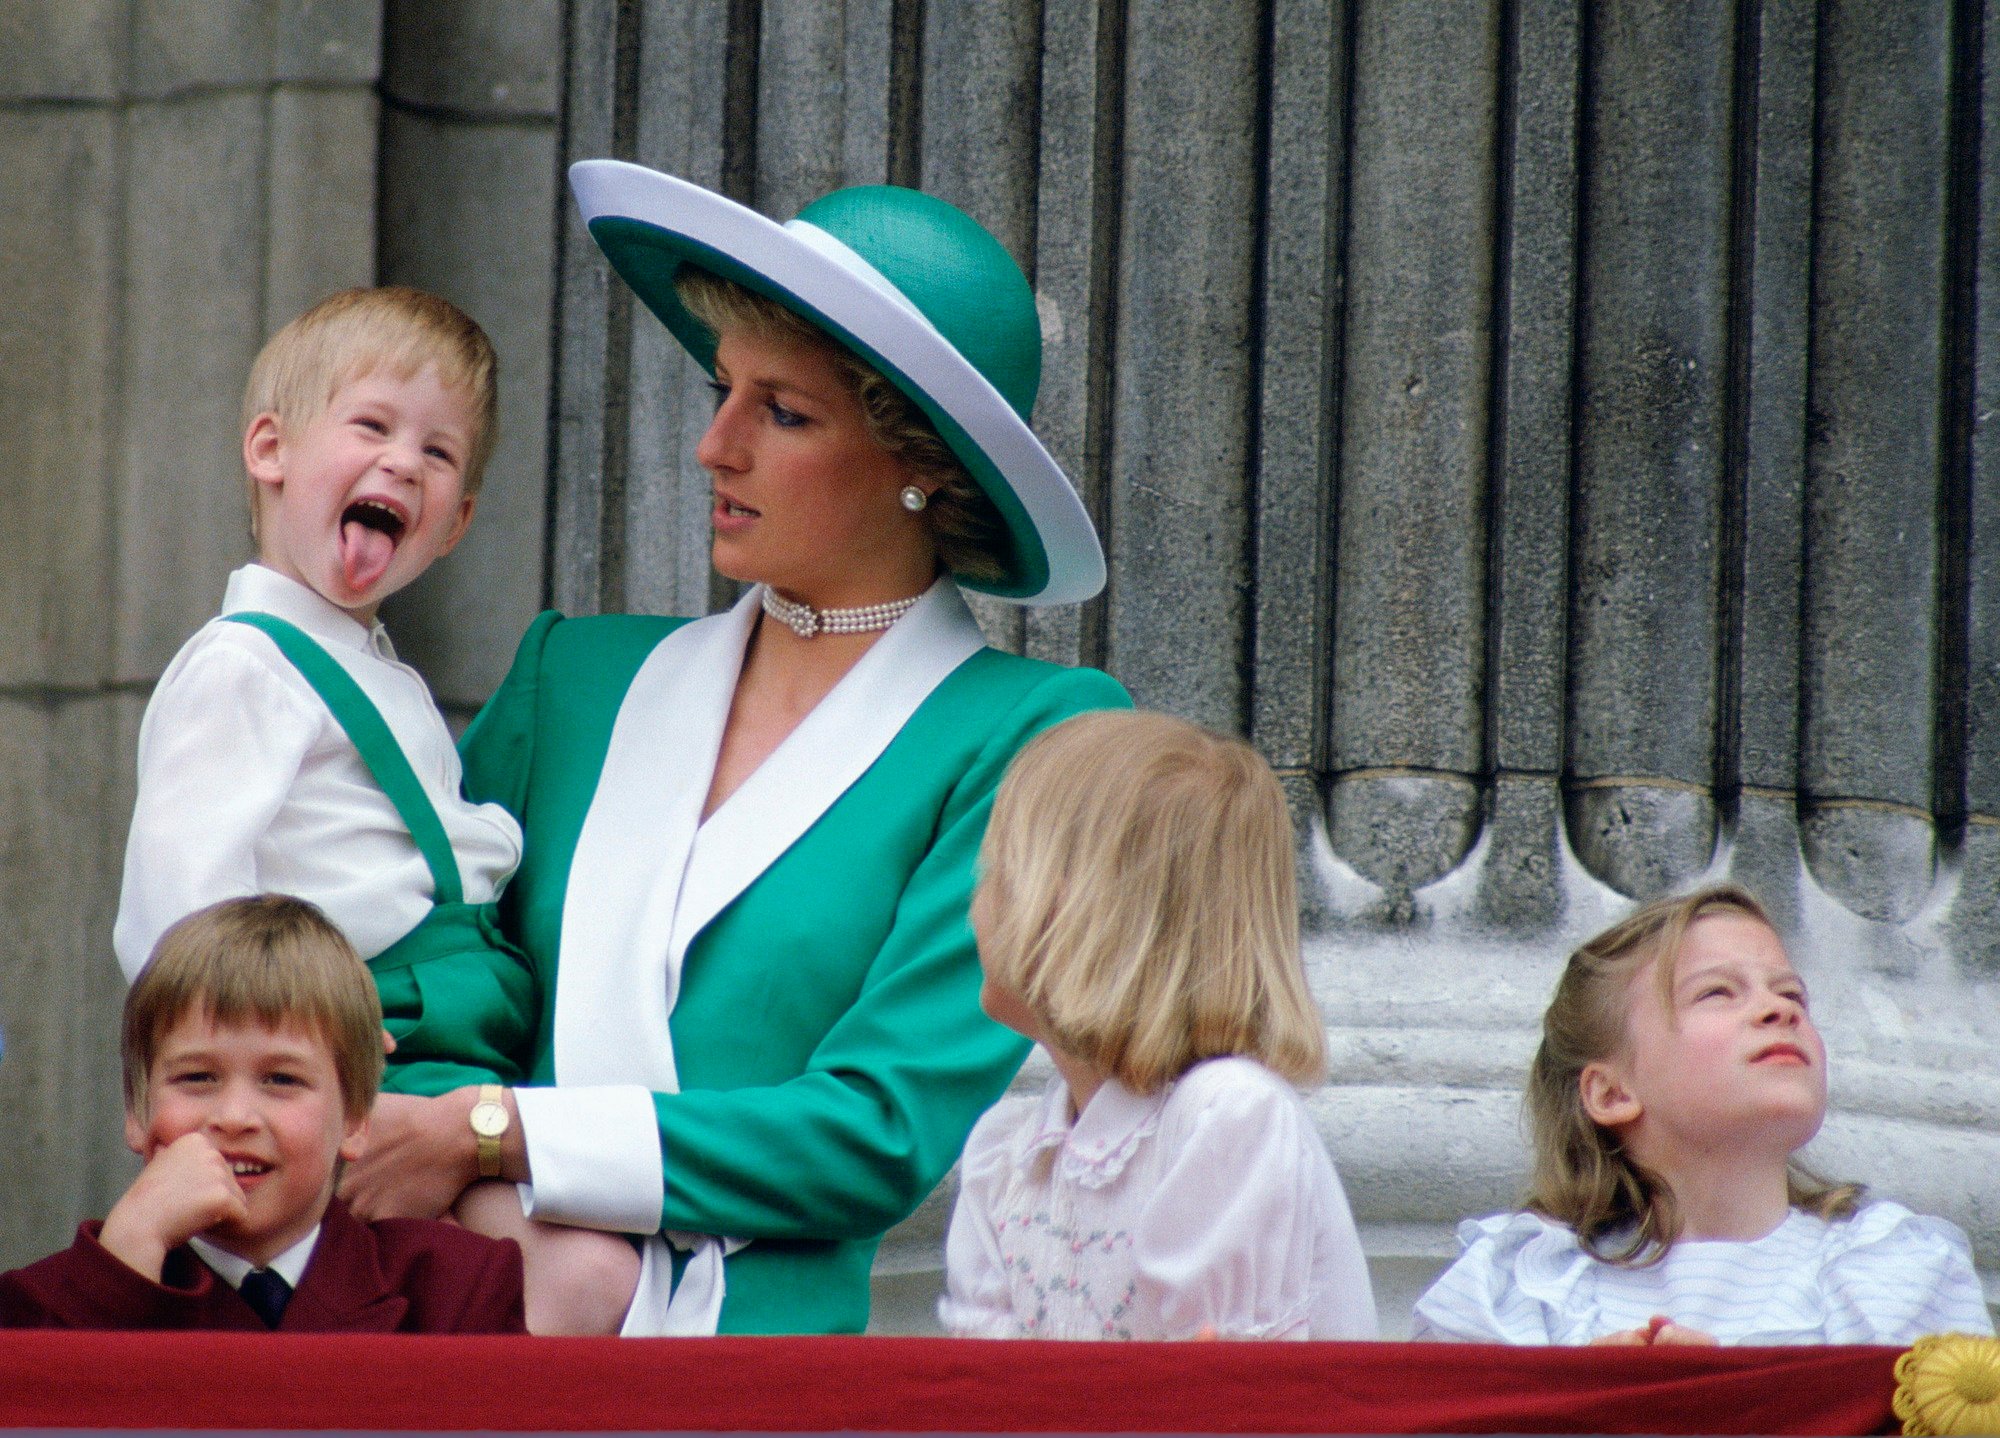 Royal family pictures can be amusing, as seen here with Prince Harry sticking out his tongue.